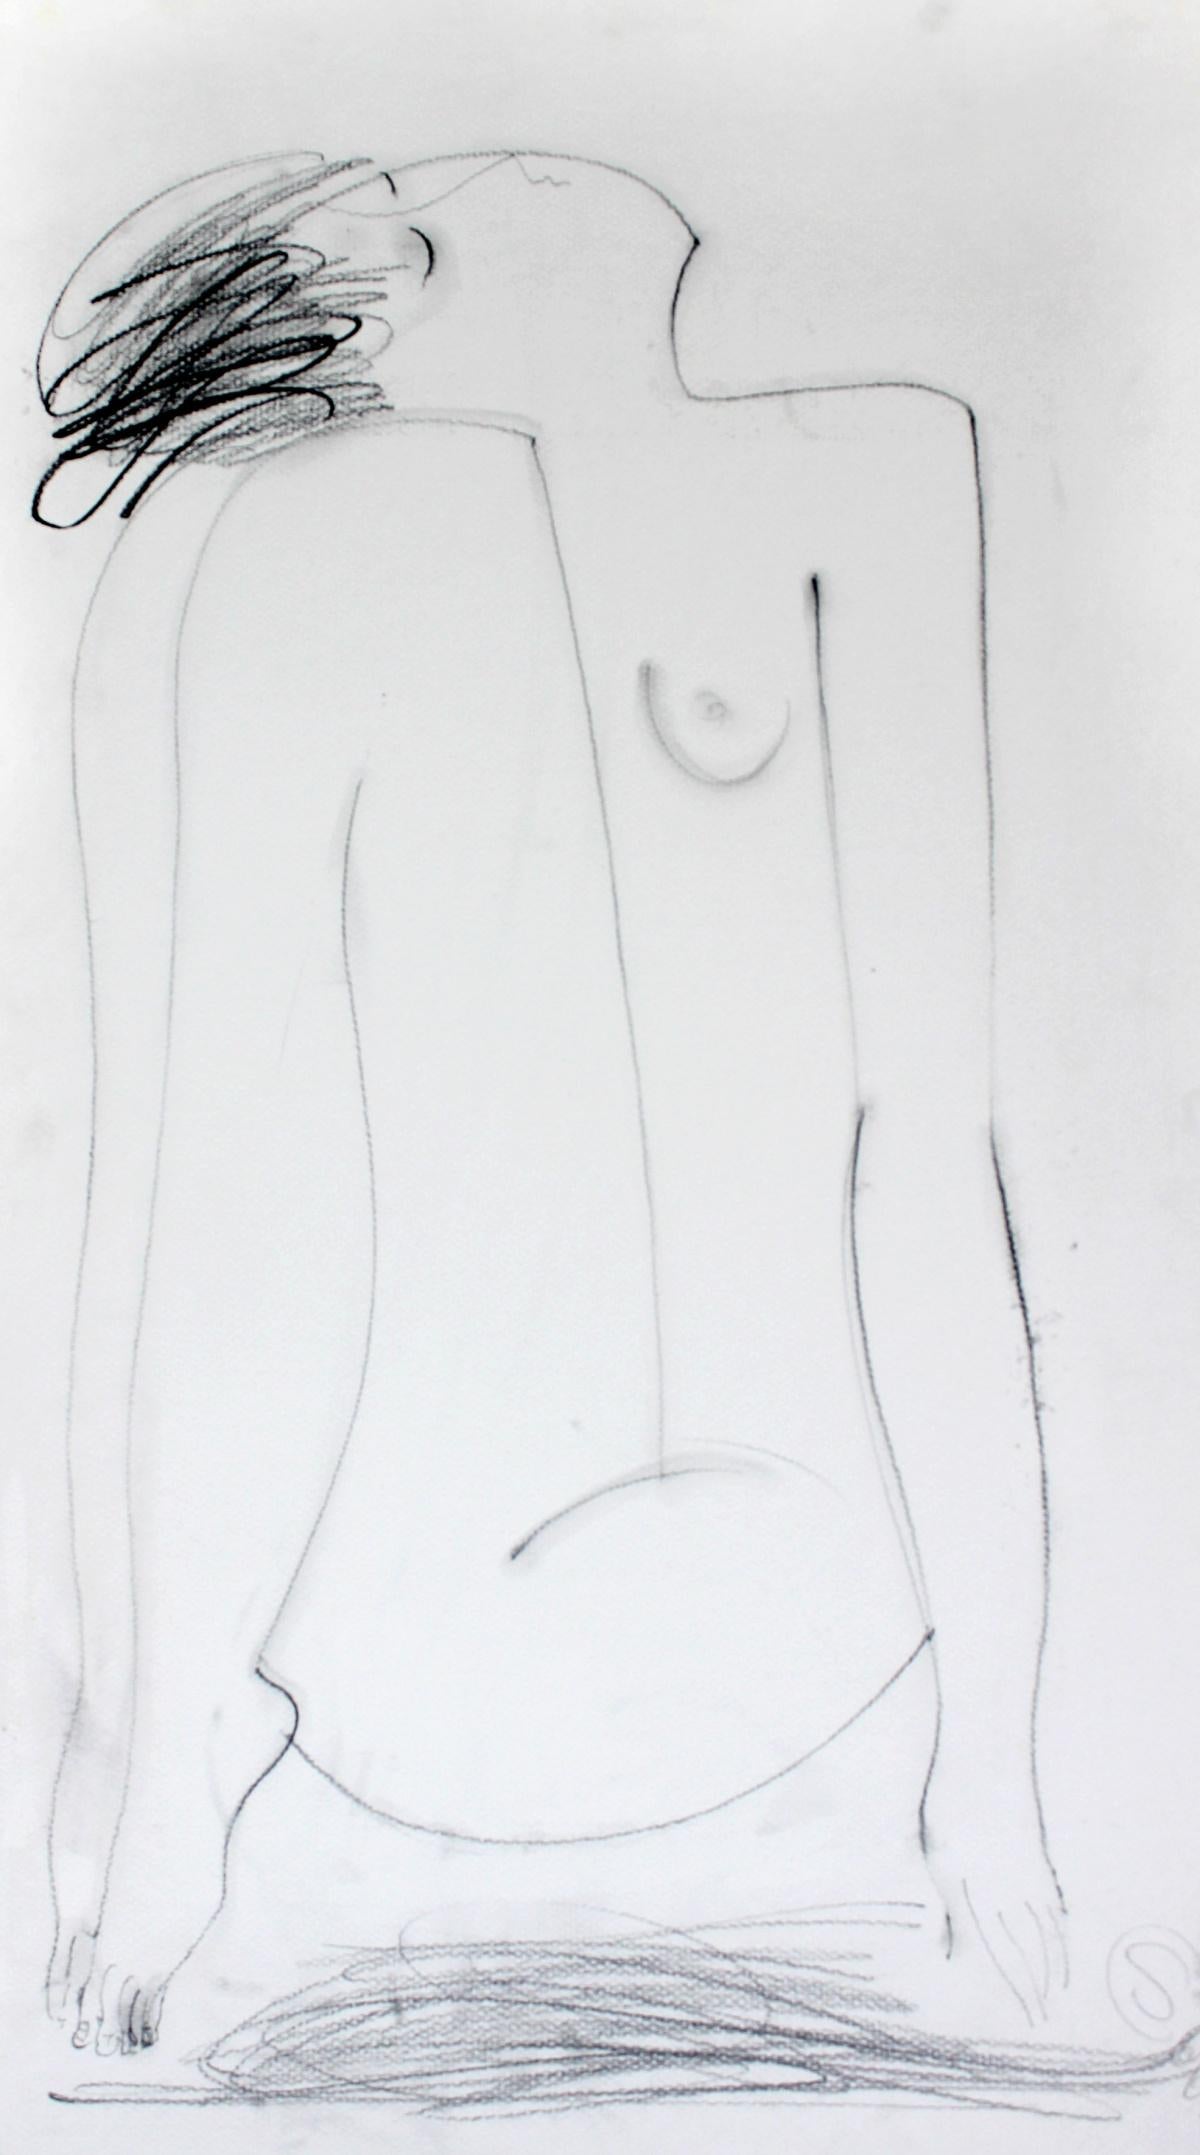 Siergiej Timochow Figurative Art - Nude - XXI Century, Contemporary Figurative Pencil Drawing on Paper